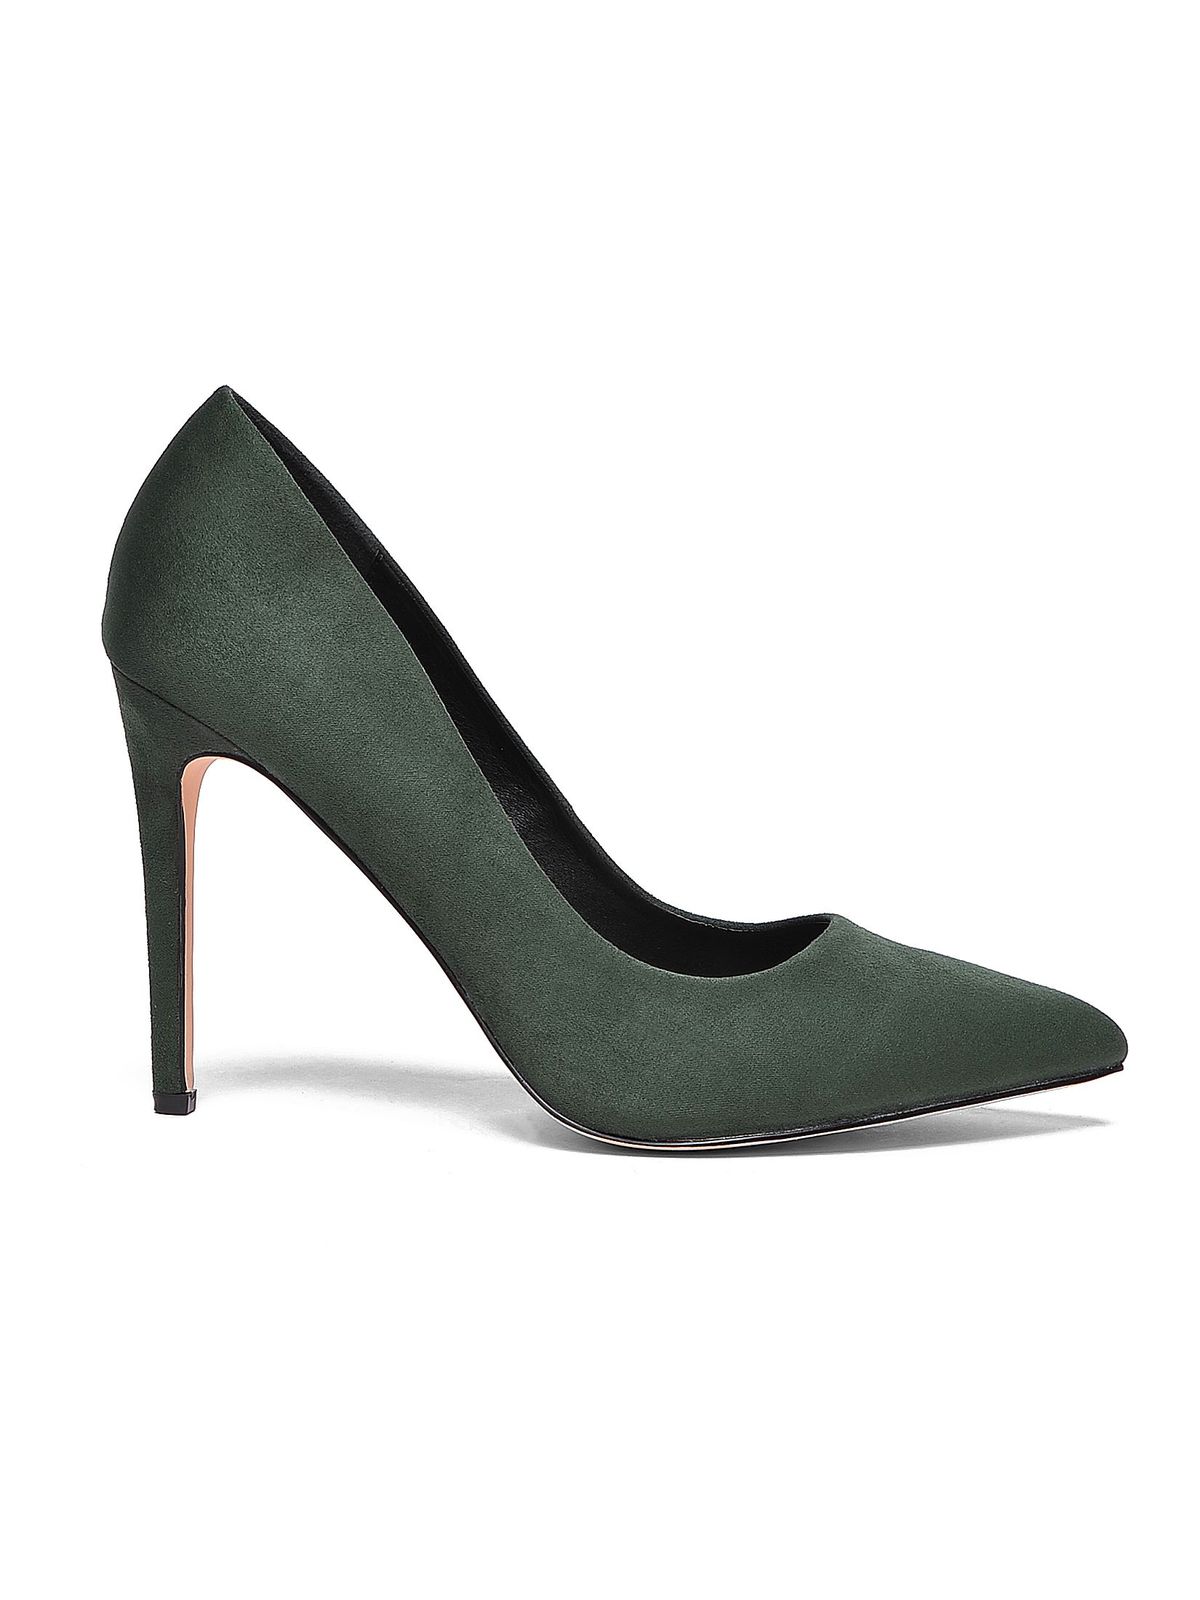 Top Secret khaki shoes with high heels slightly pointed toe tip